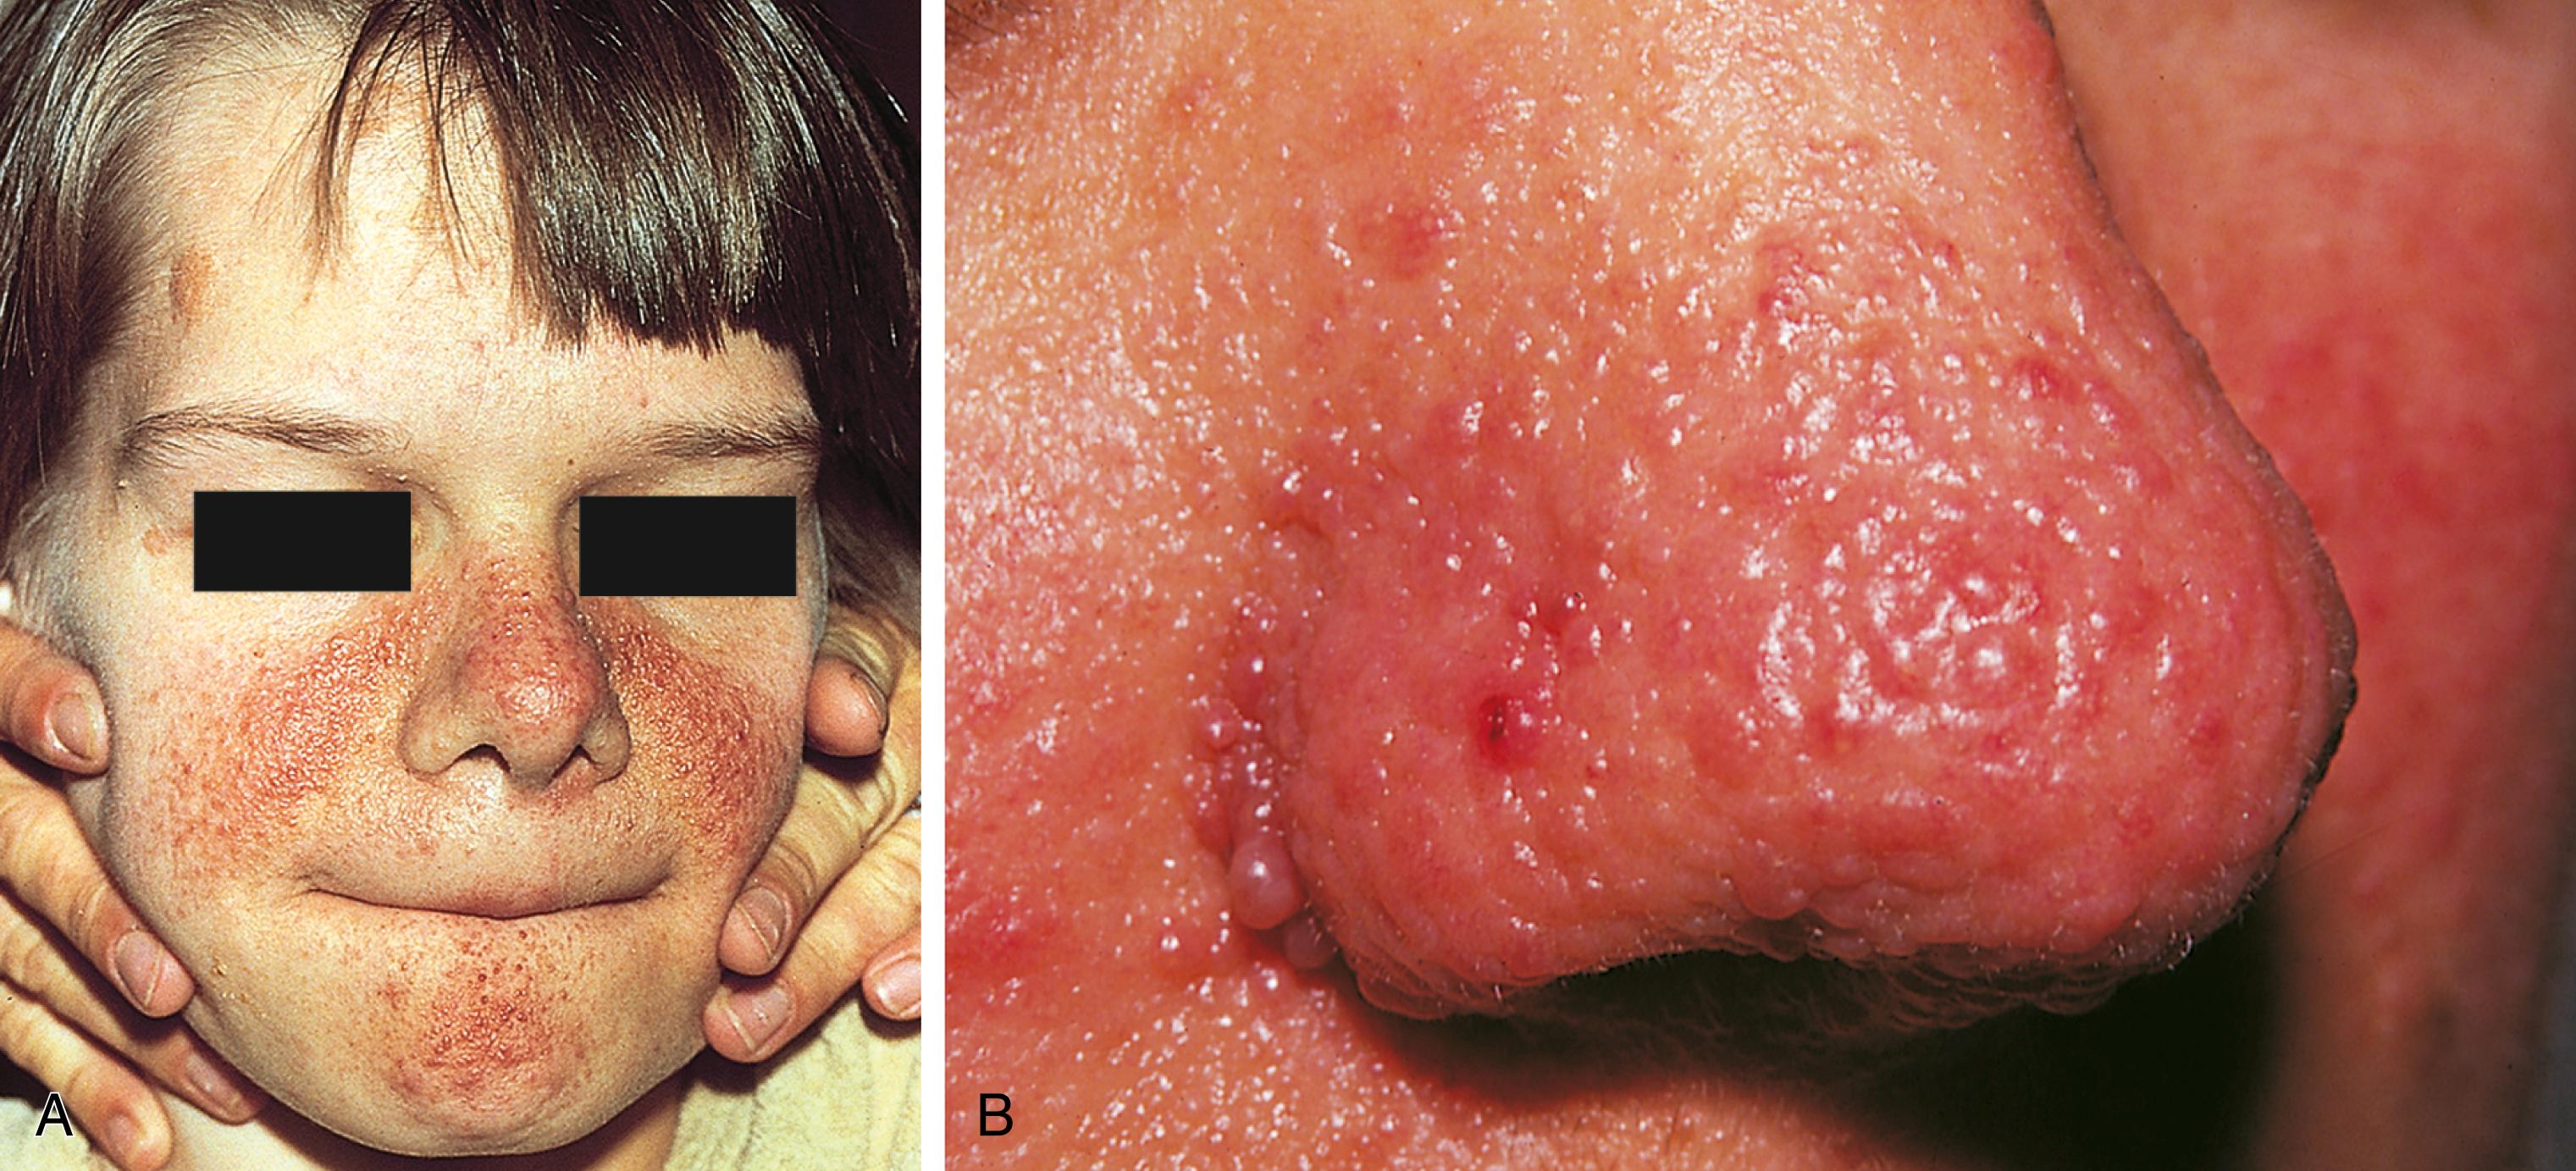 Fig. 16.8, Tuberous sclerosis (TS). (A) This adolescent boy had adenoma sebaceum in a characteristic malar distribution and chin lesions as well. (B) A close-up view of nasal lesions is shown.